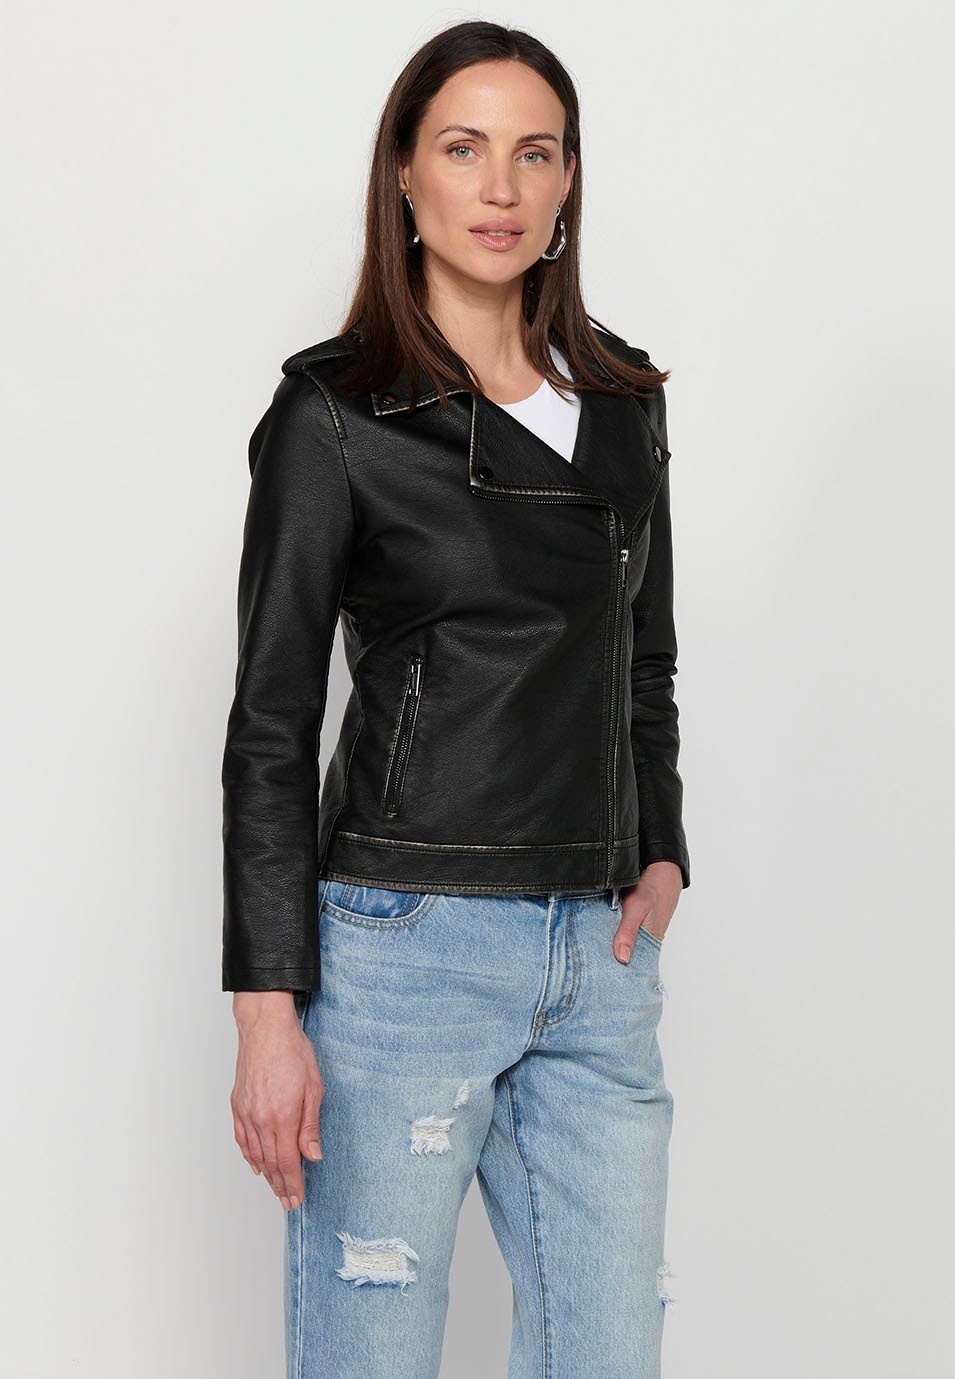 Leather-effect double-breasted jacket with lapel collar and front zipper closure in Black for Women 3